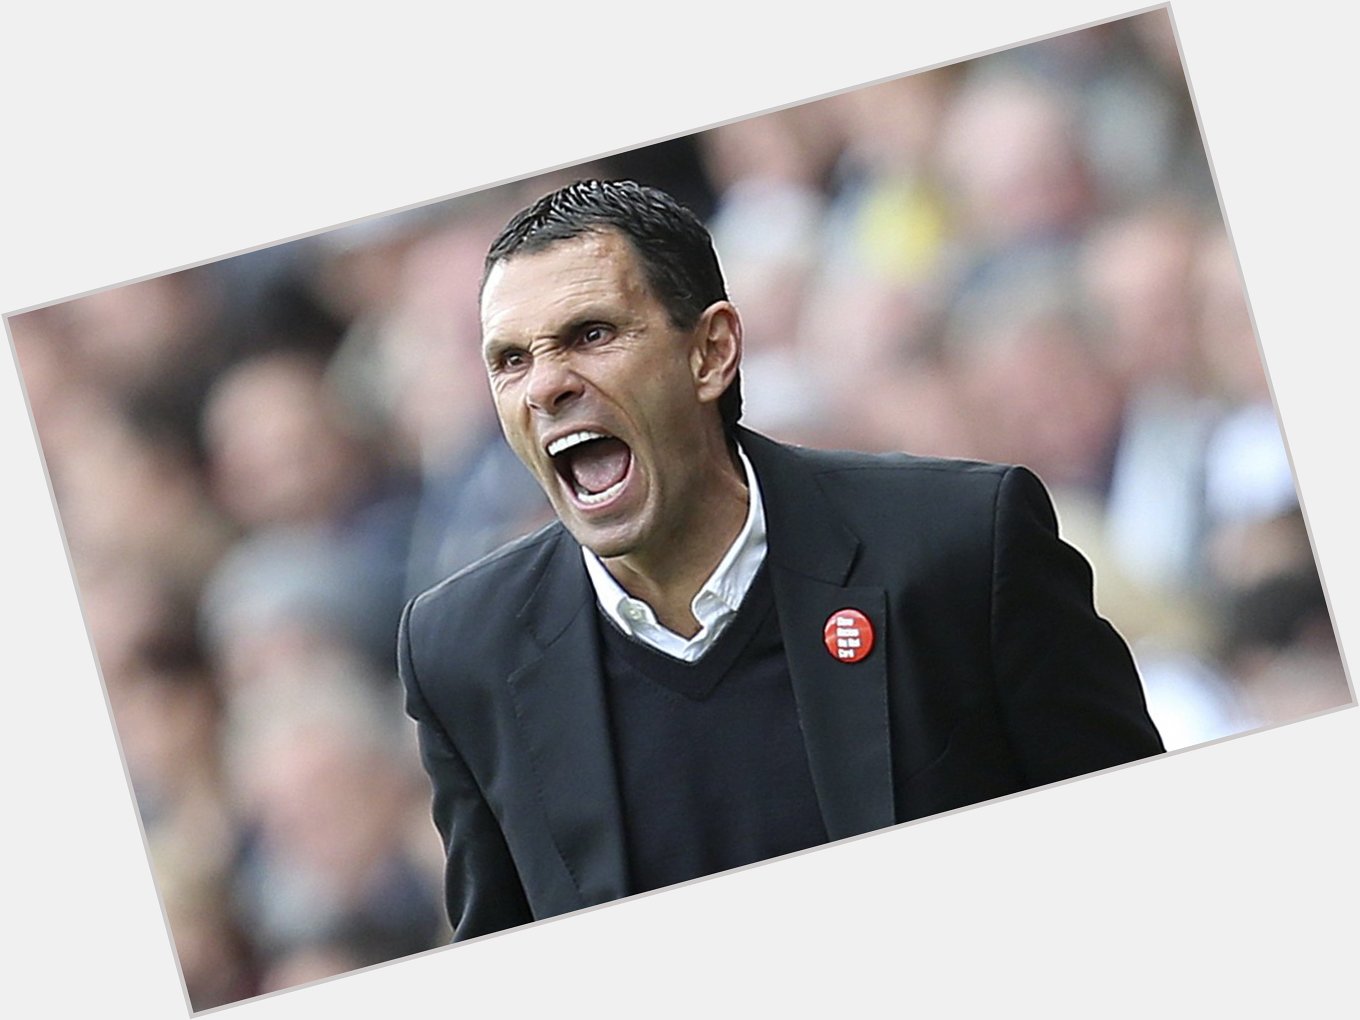 HAPPY BIRTHDAY - Ex-Chelsea and Spurs player Gus Poyet turns 48 today  